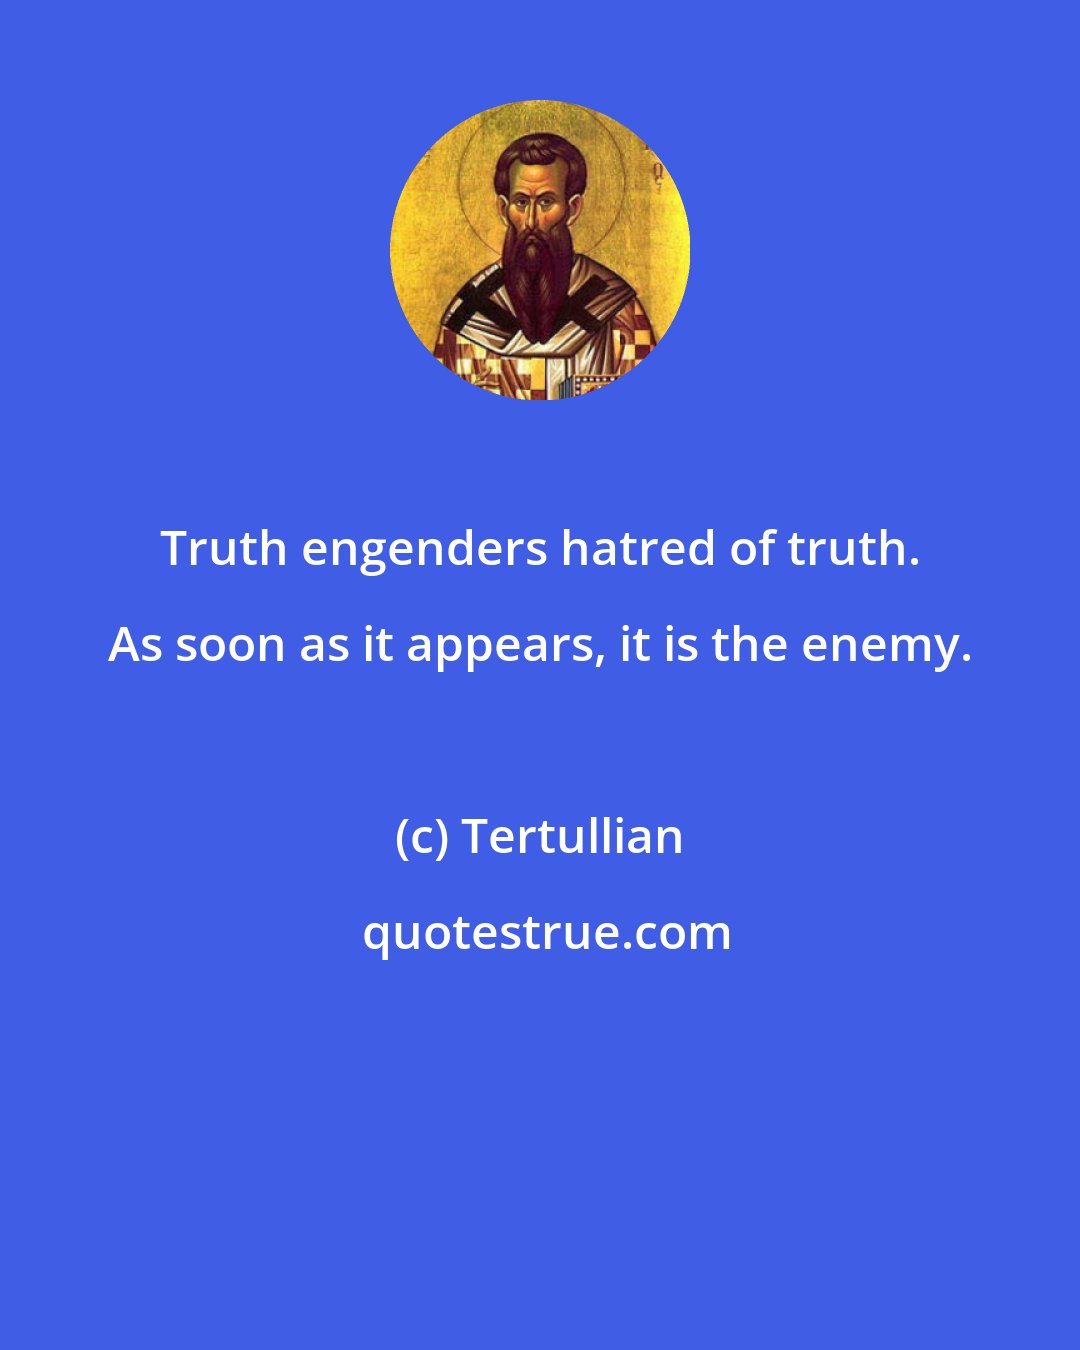 Tertullian: Truth engenders hatred of truth. As soon as it appears, it is the enemy.